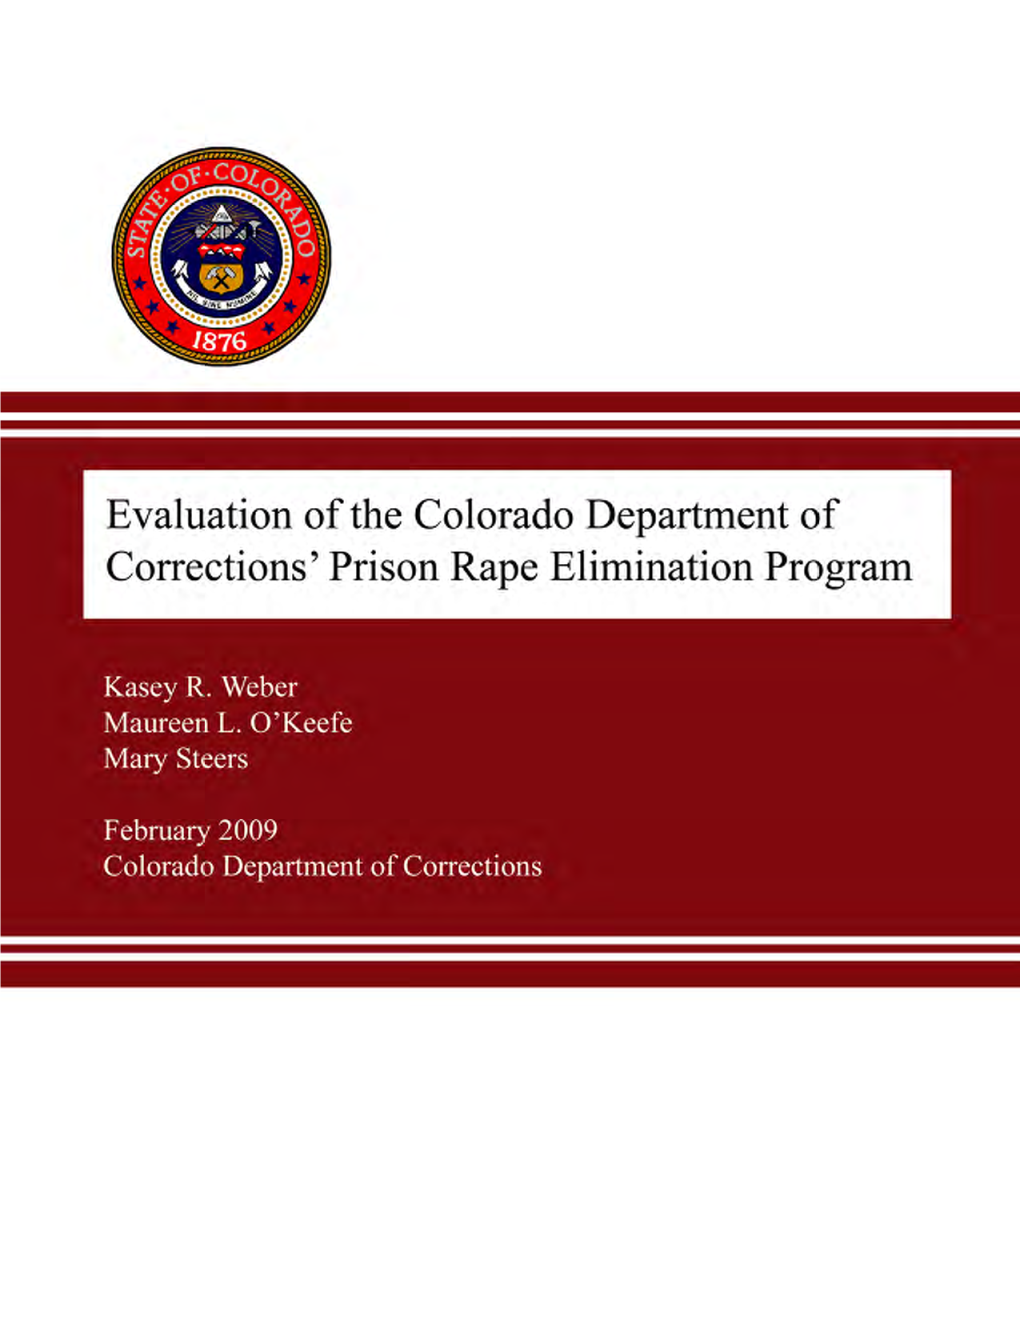 Evaluation of the Colorado Department of Corrections' Prison